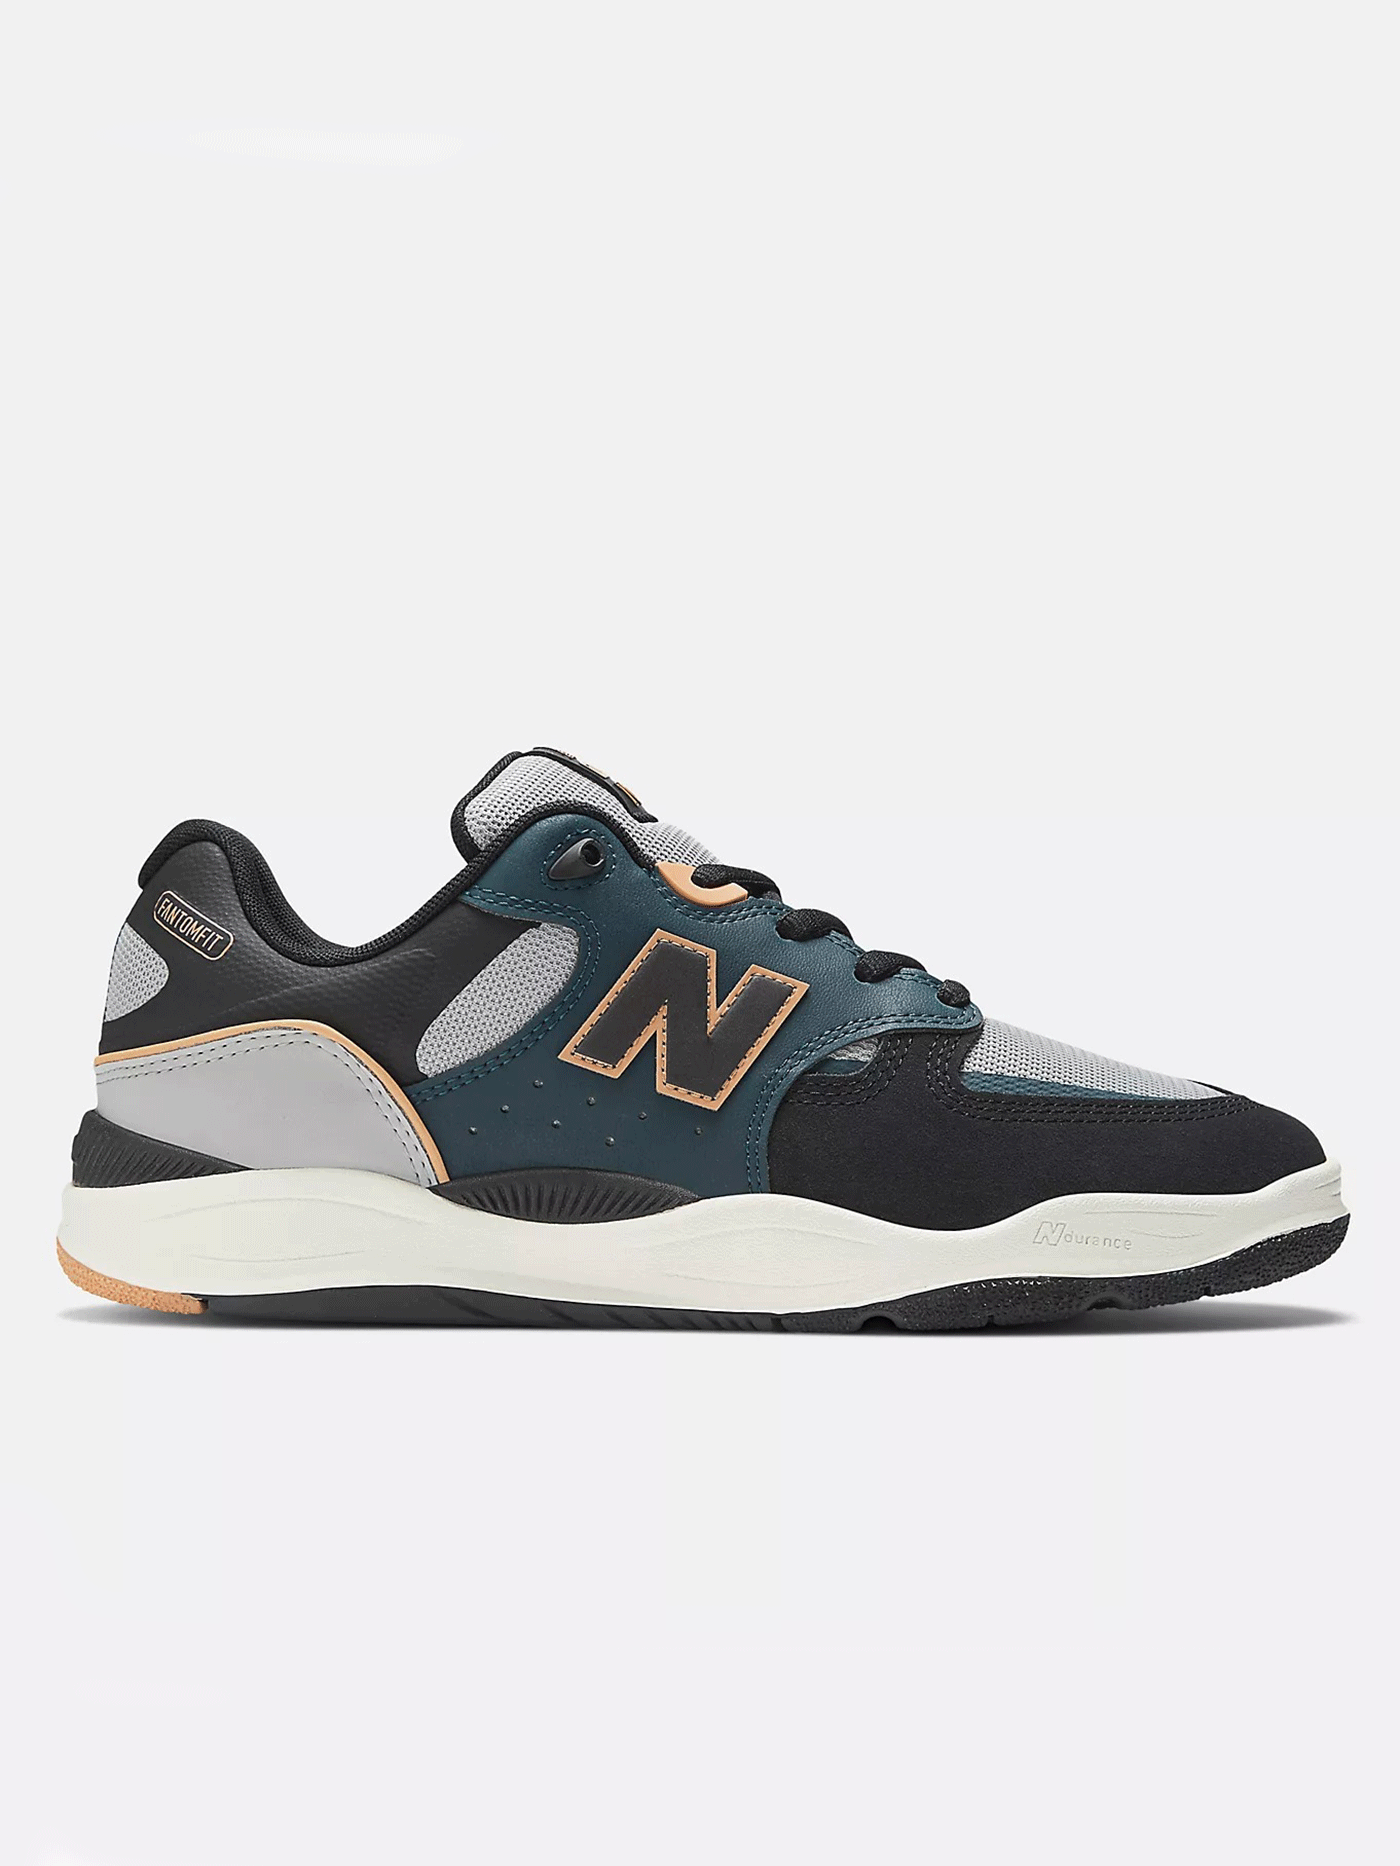 New Balance Numeric 1010 Tiago Teal/Black Shoes Holiday 2023